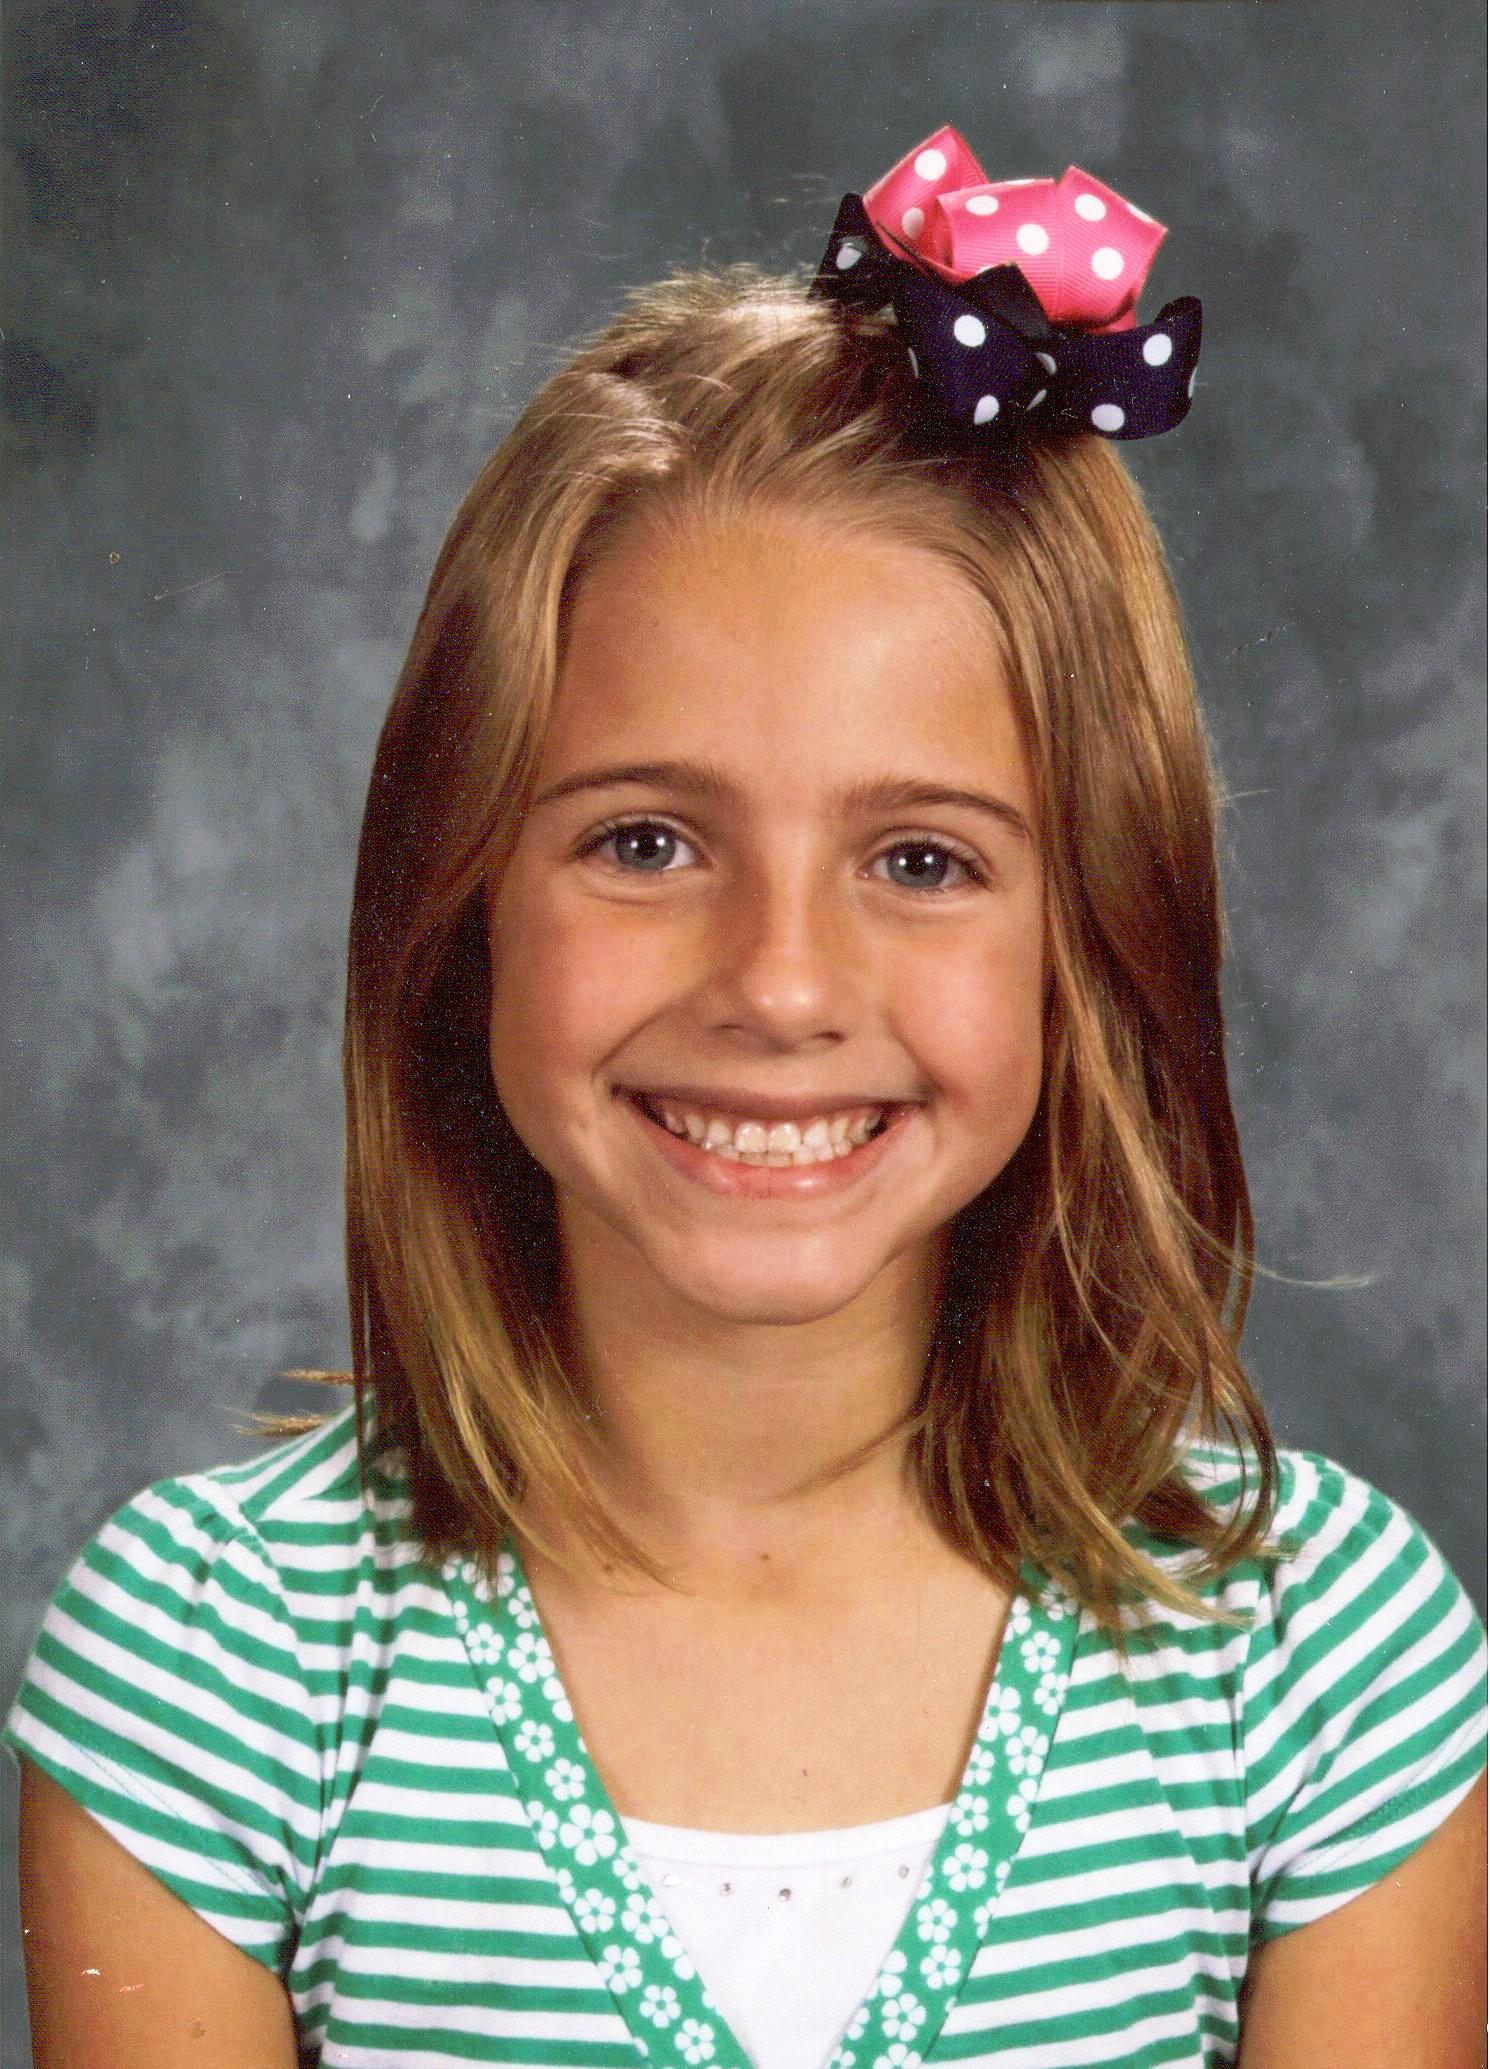 2010-2nd-grade-spring-picture_14551067424_o.jpg